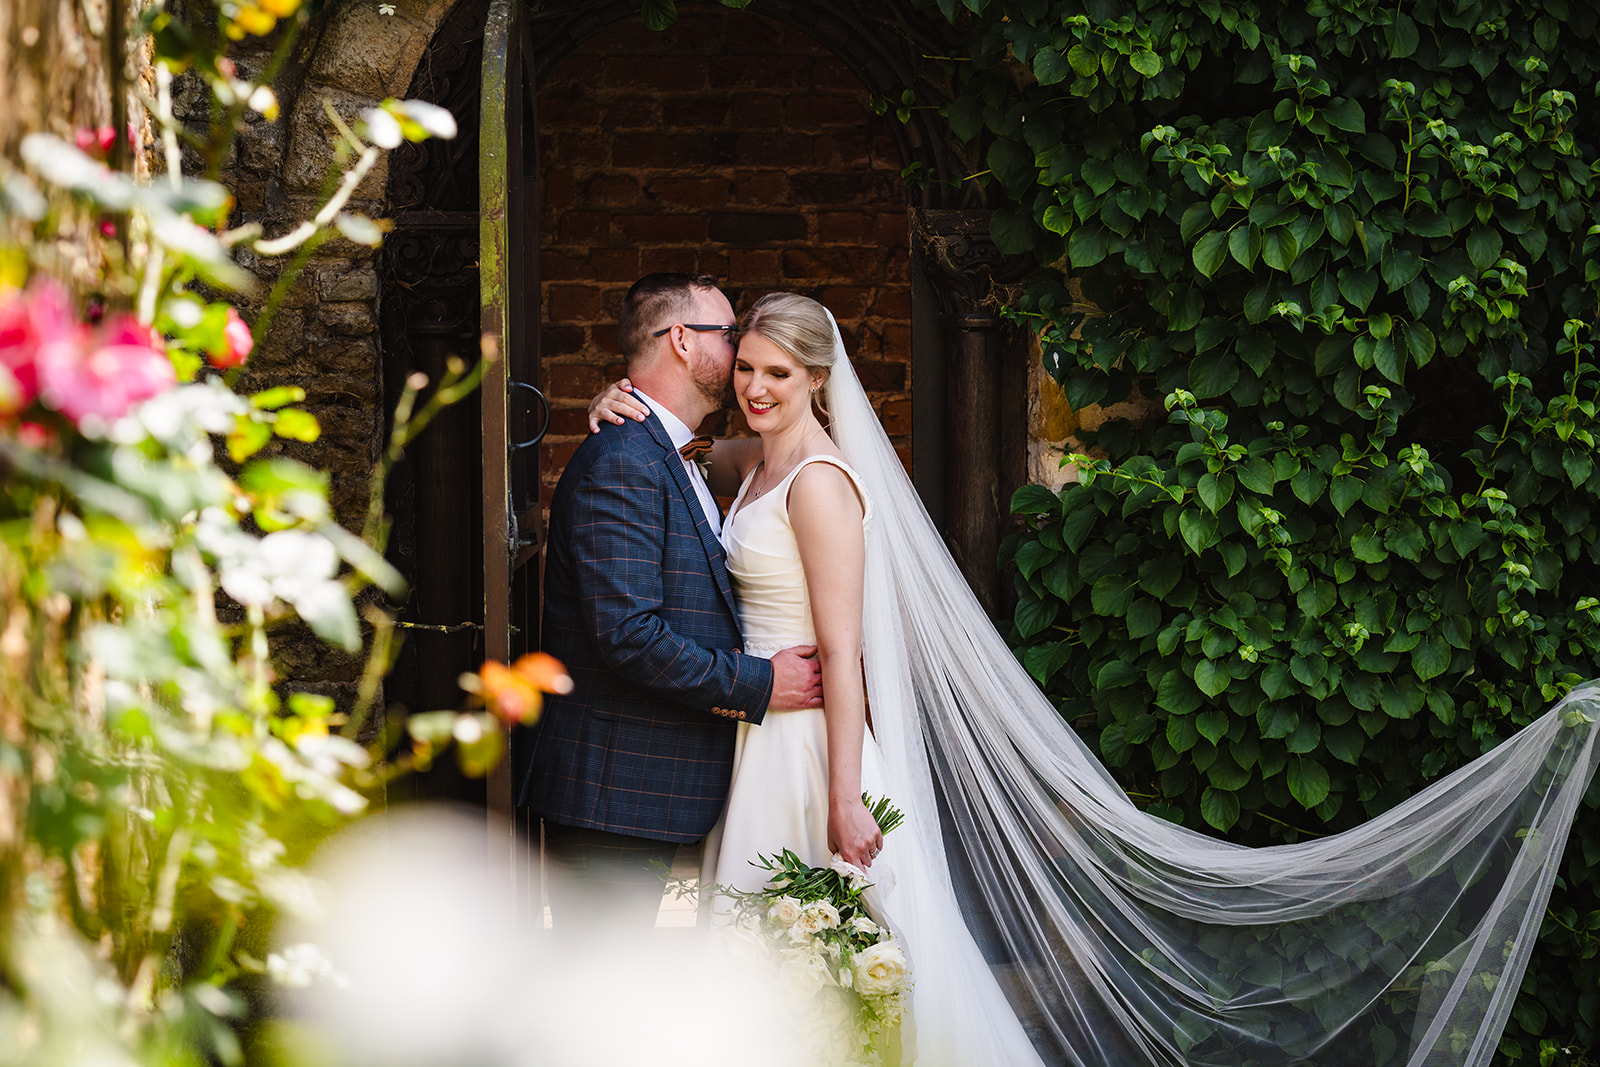 Bride and groom in the rose garden after their stapleford park wedding by Amanda Forman Photography